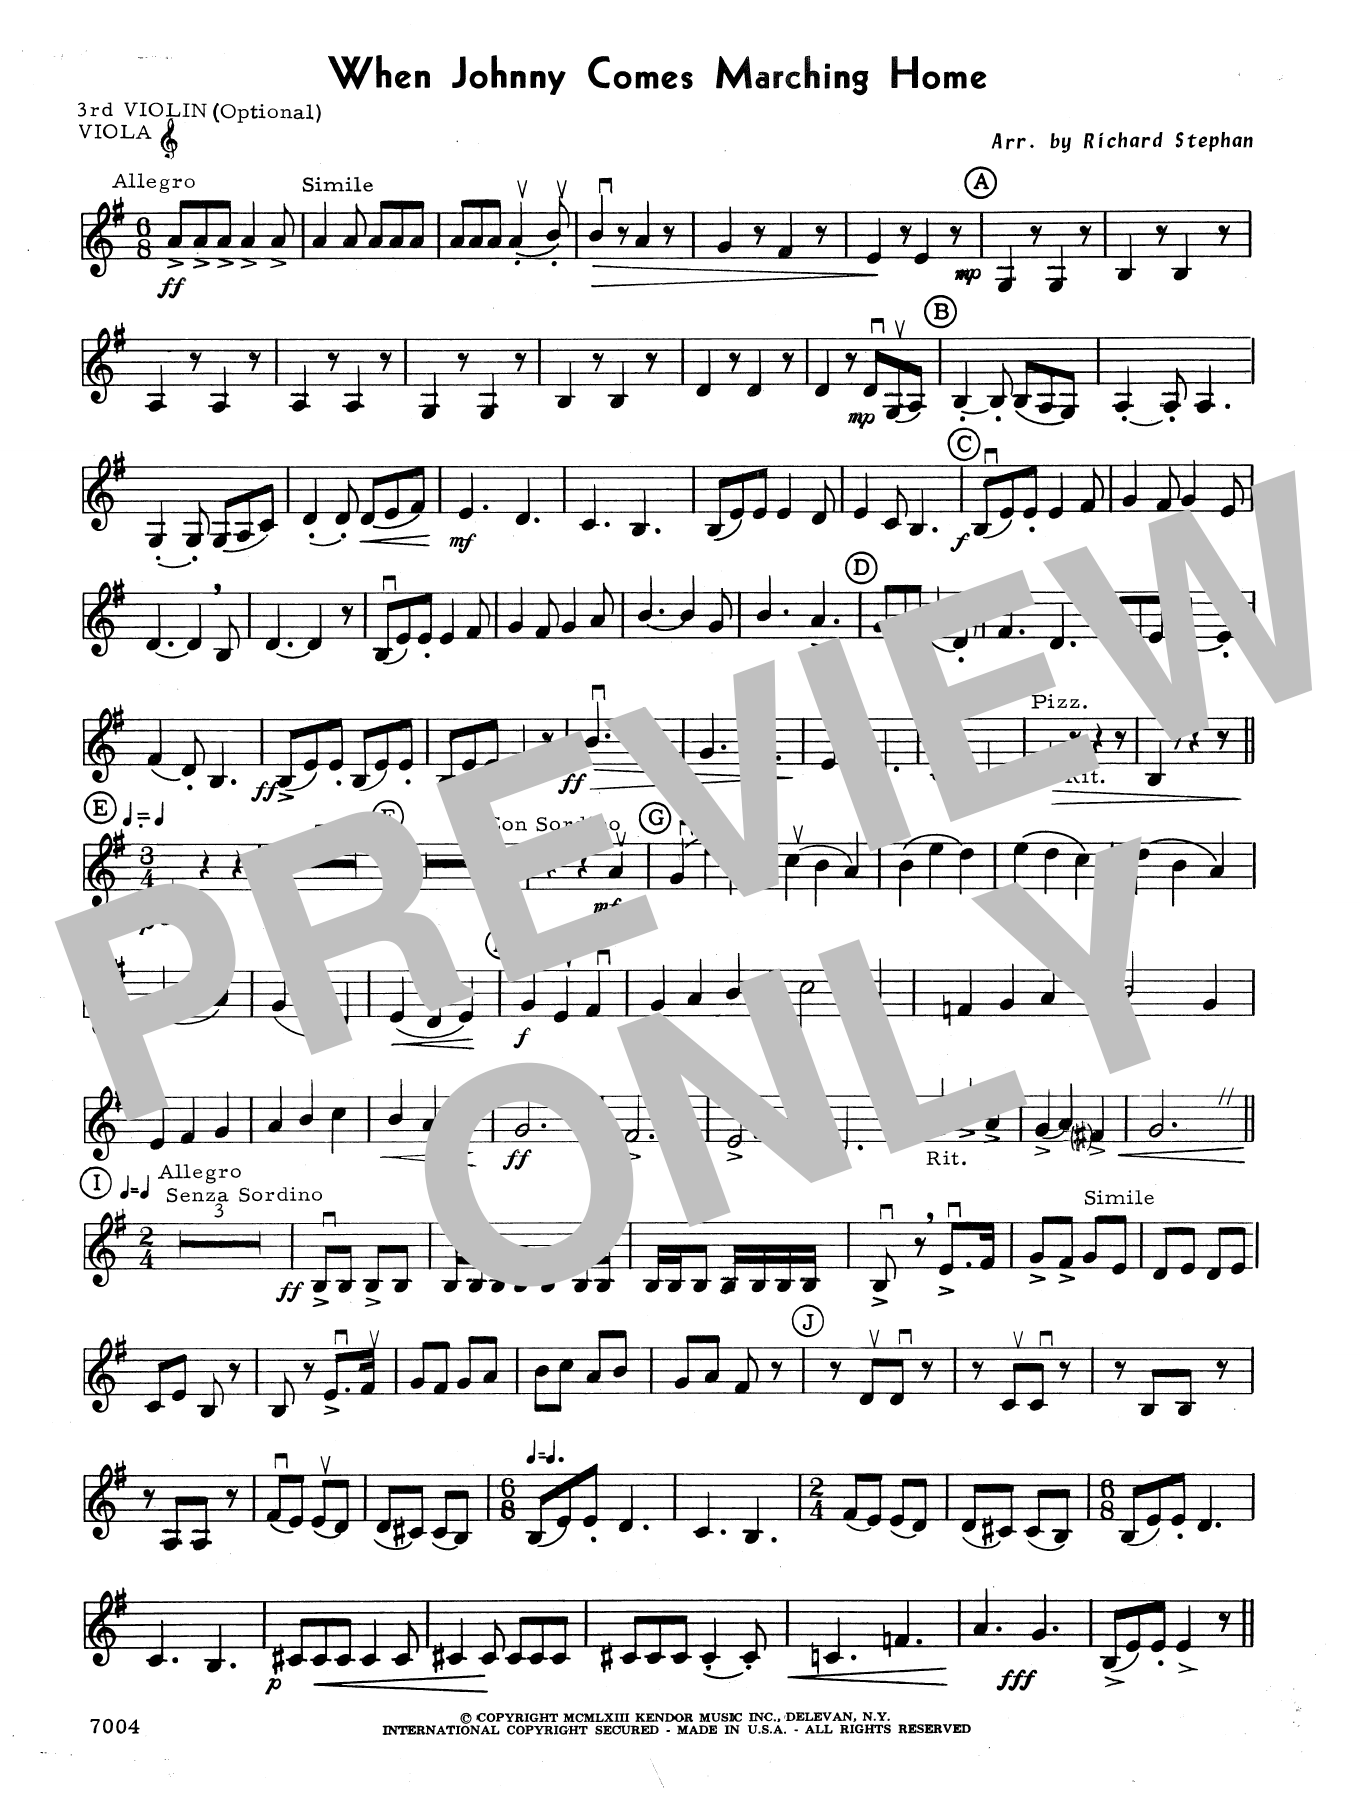 Download Richard Stephan When Johnny Comes Marching Home - Violi Sheet Music